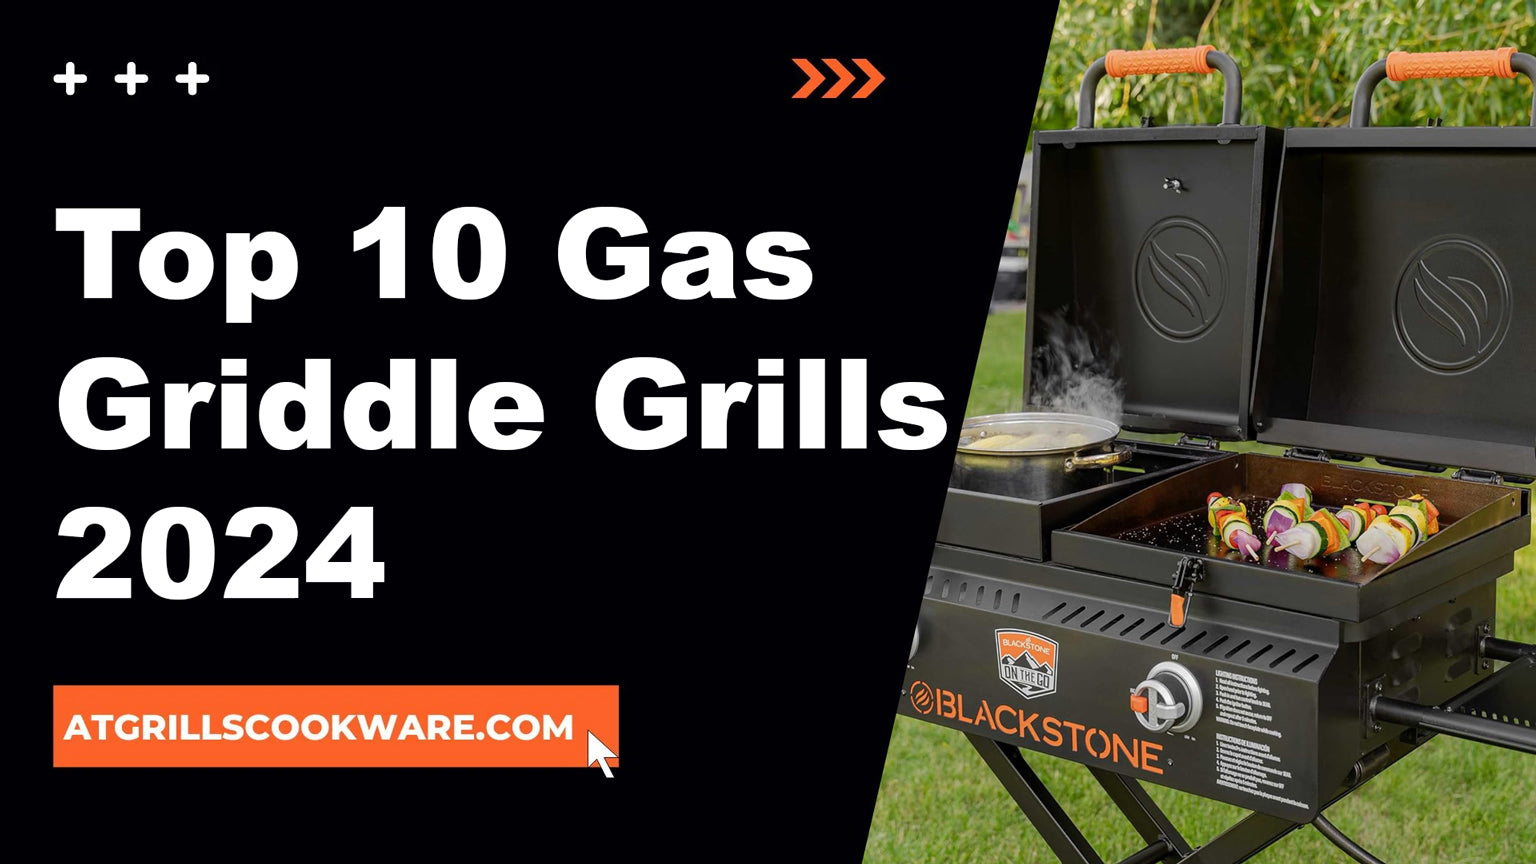 The Top 10 Gas Griddle Grills 2024